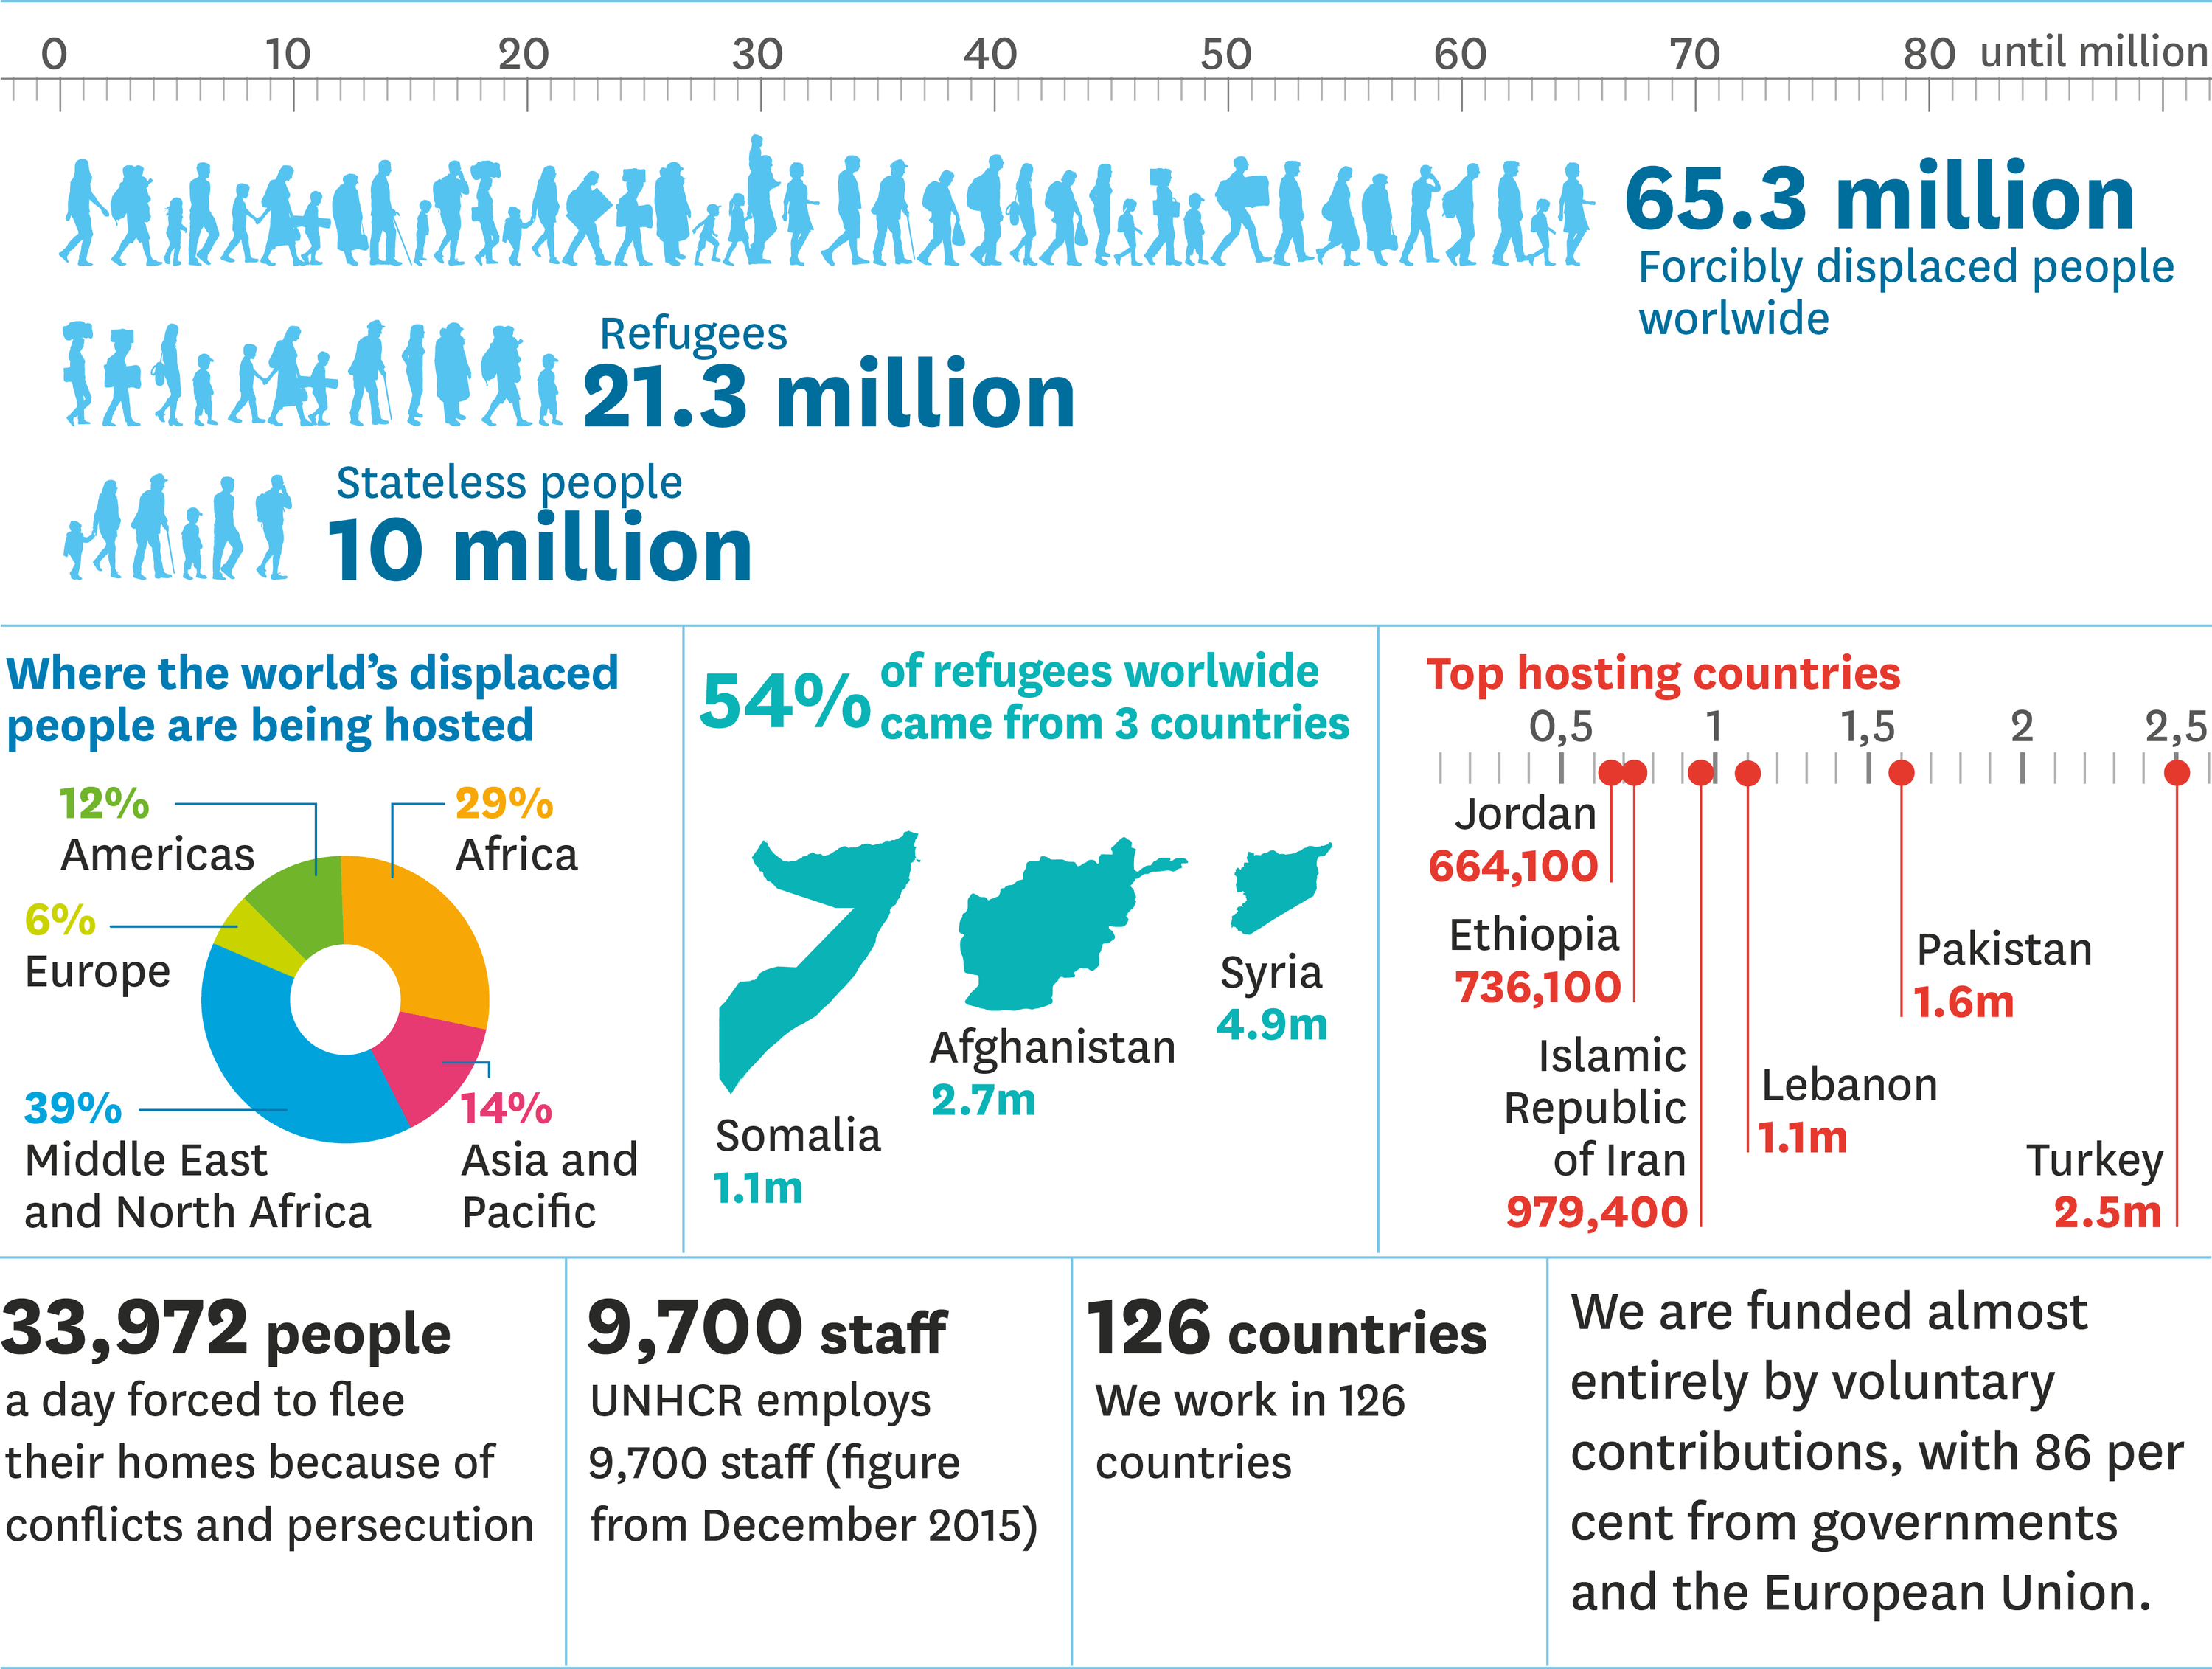 The world’s displaced people